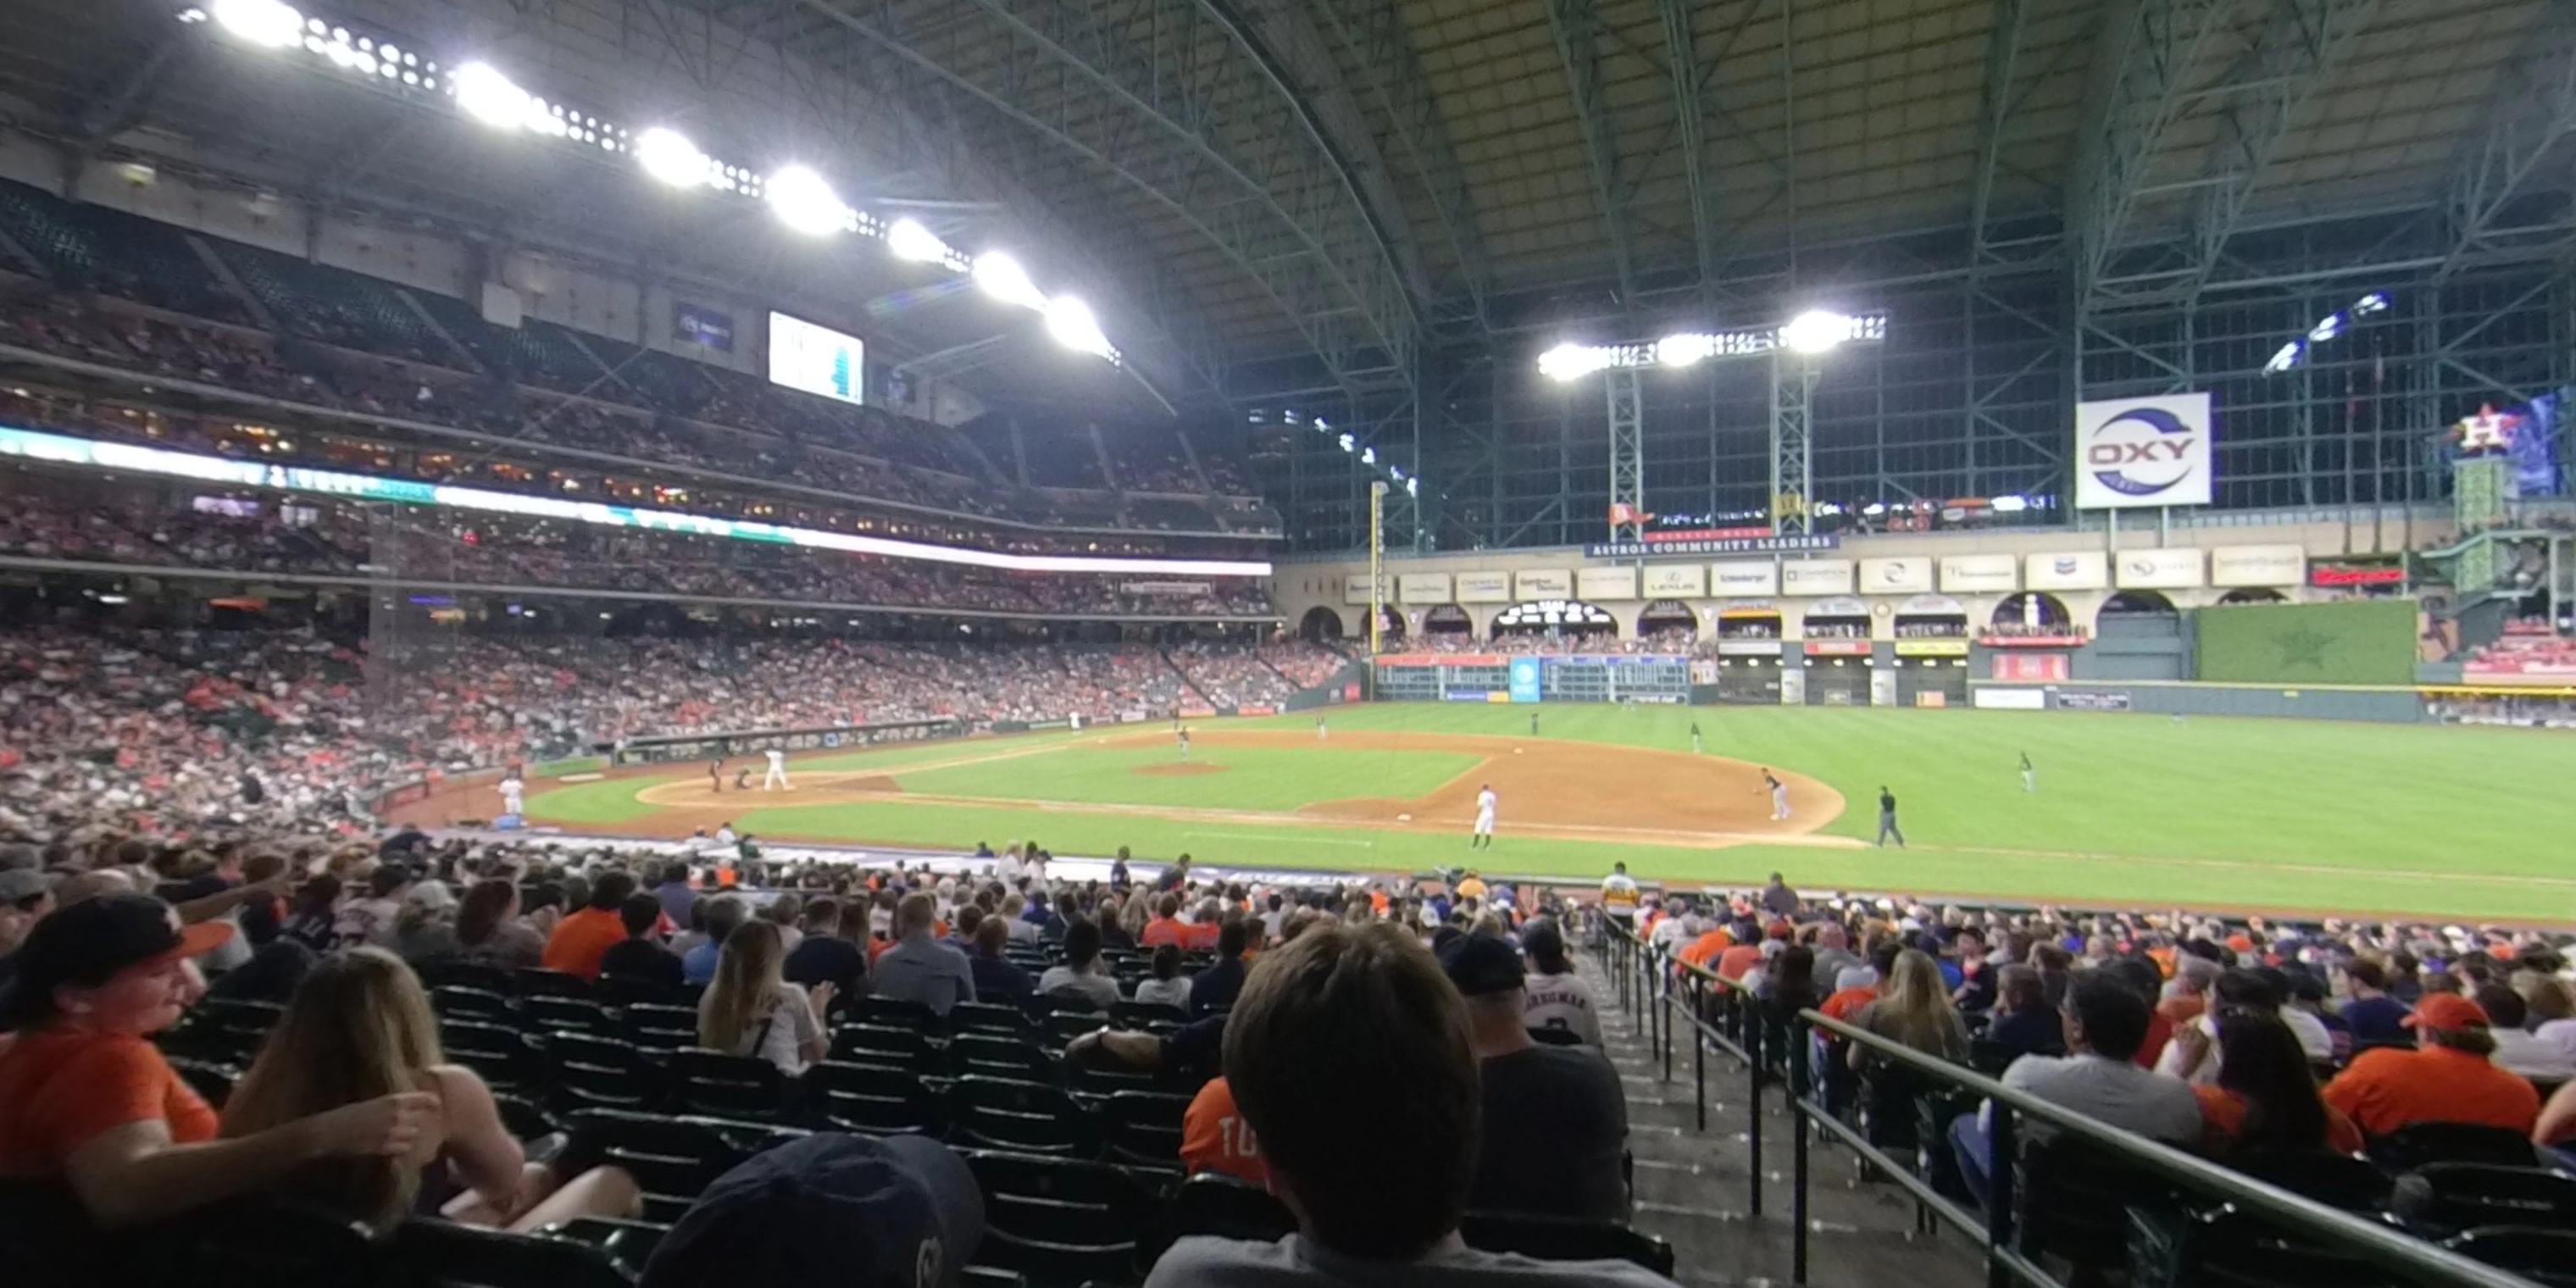 Section 126 at Minute Maid Park 